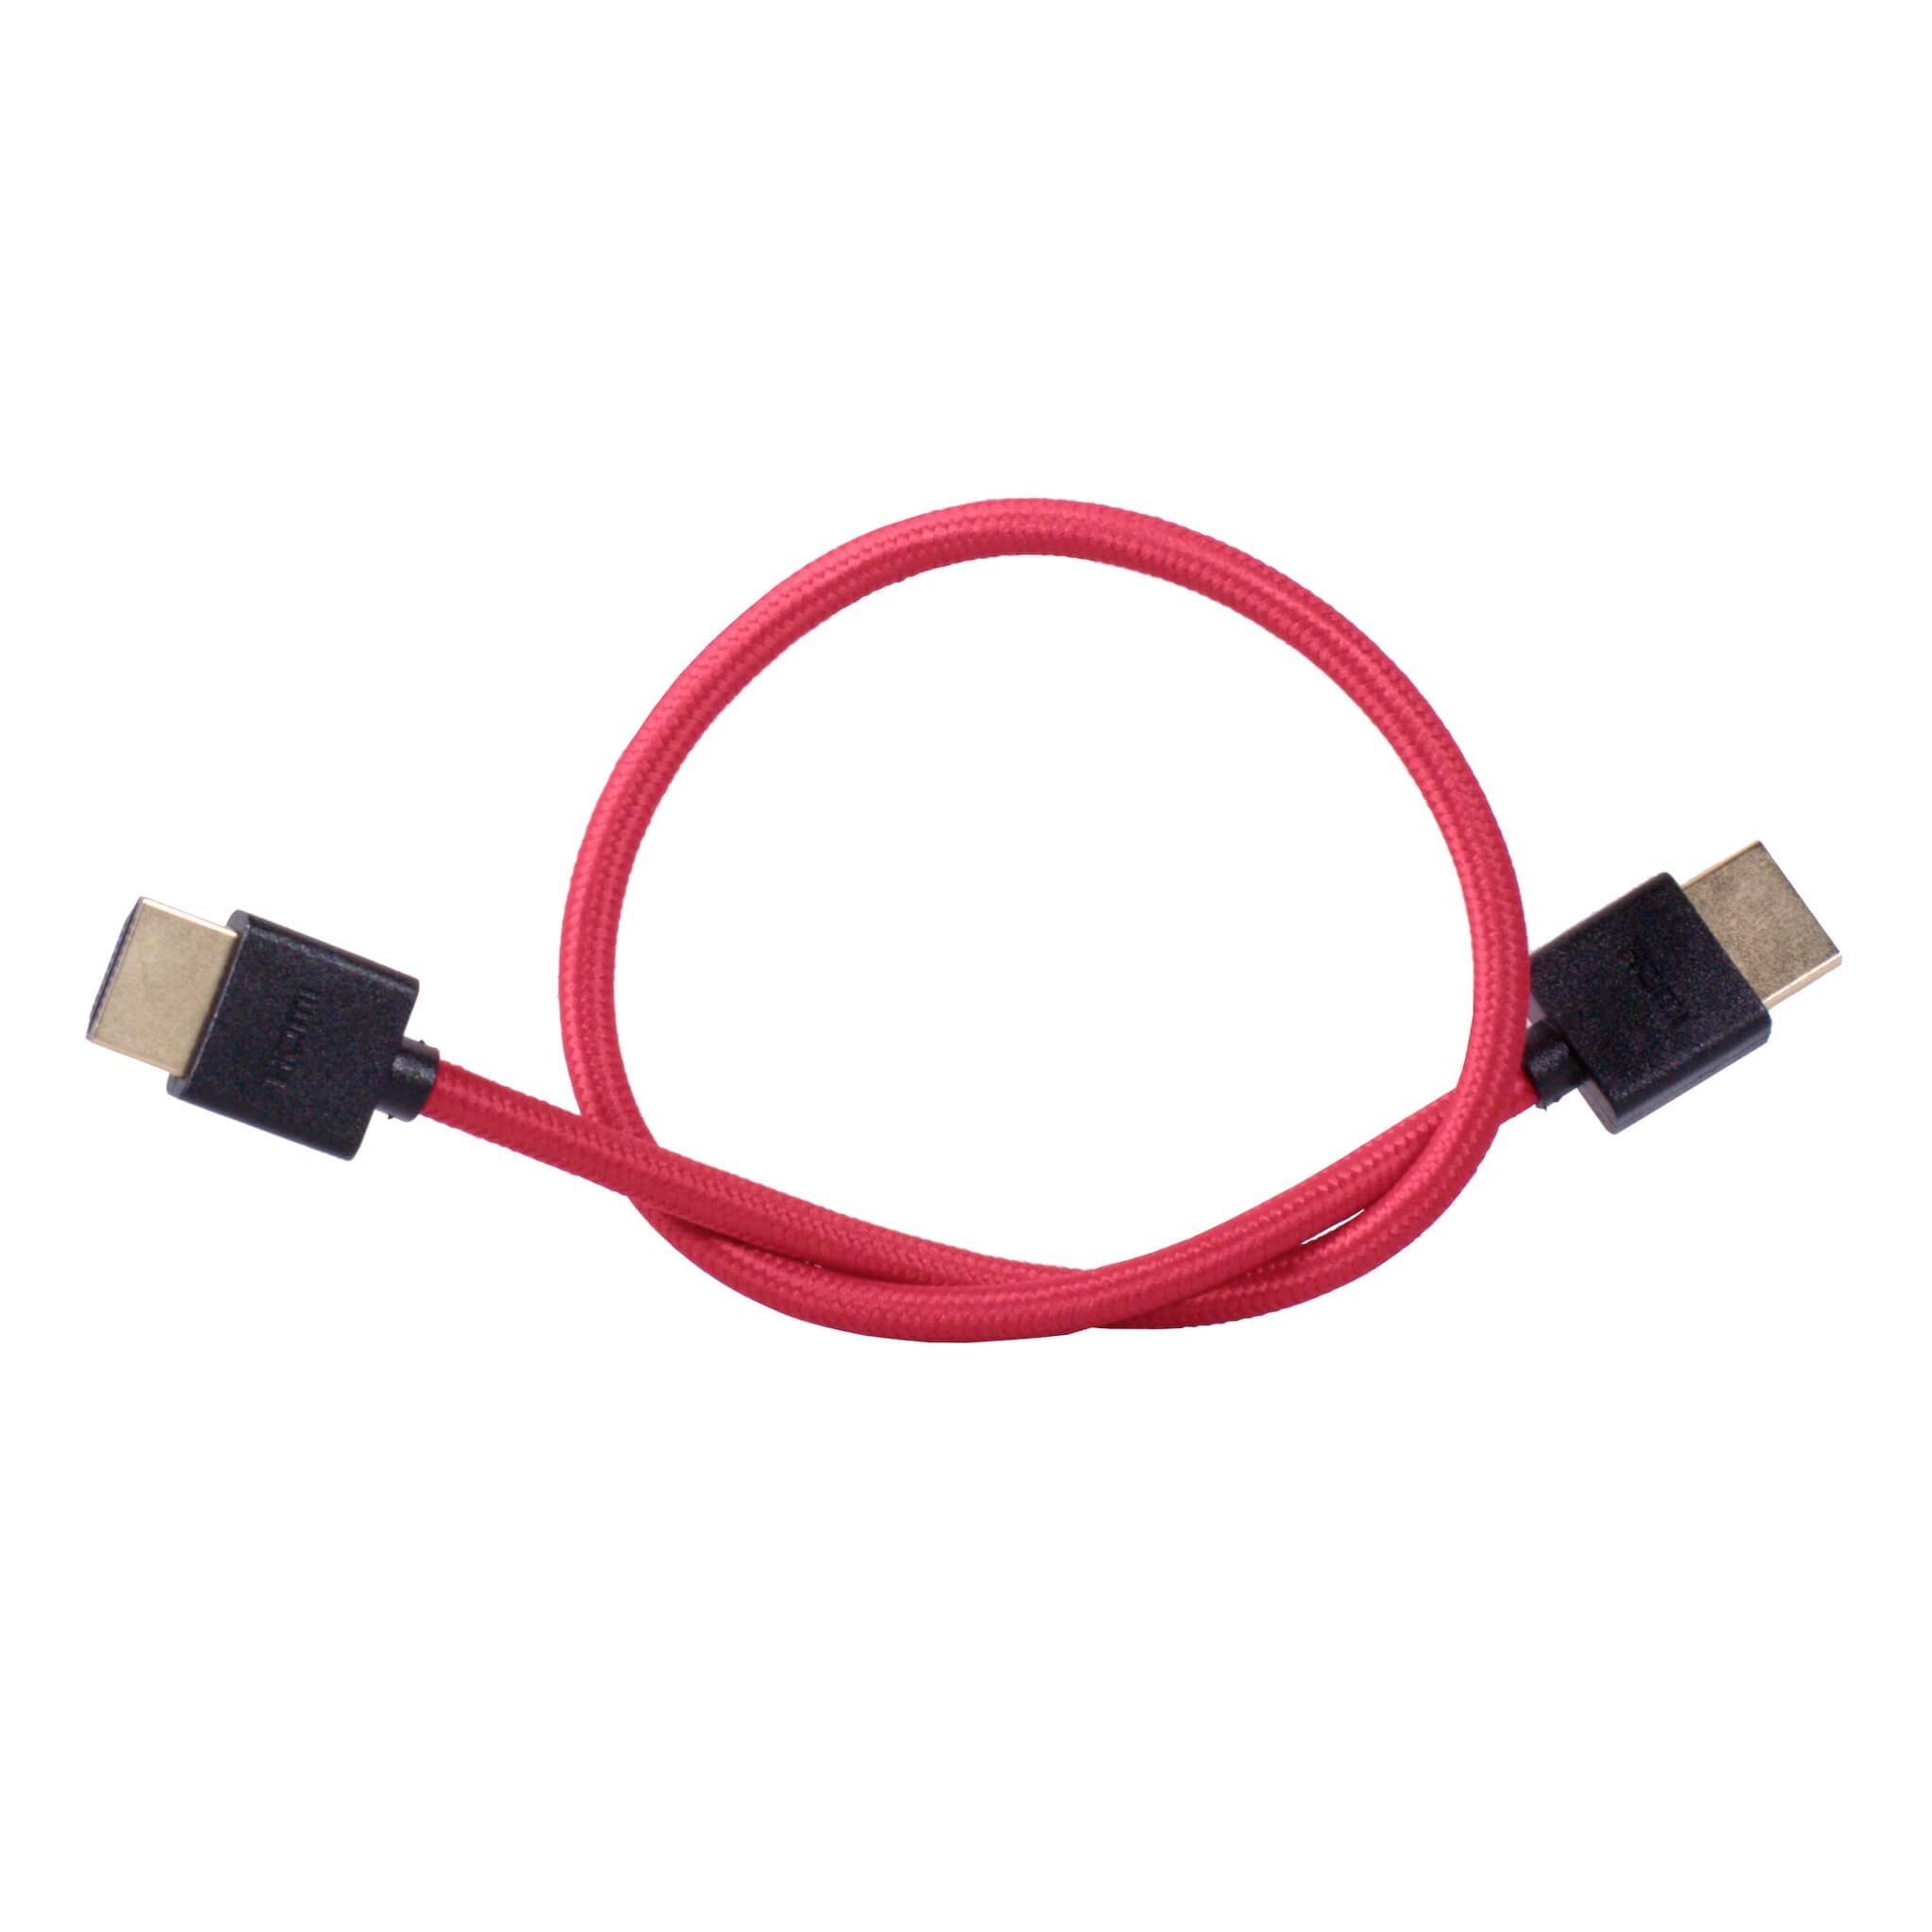 1SourceVideo - HDMI to HDMI Thin Braided Cable, 16-inch